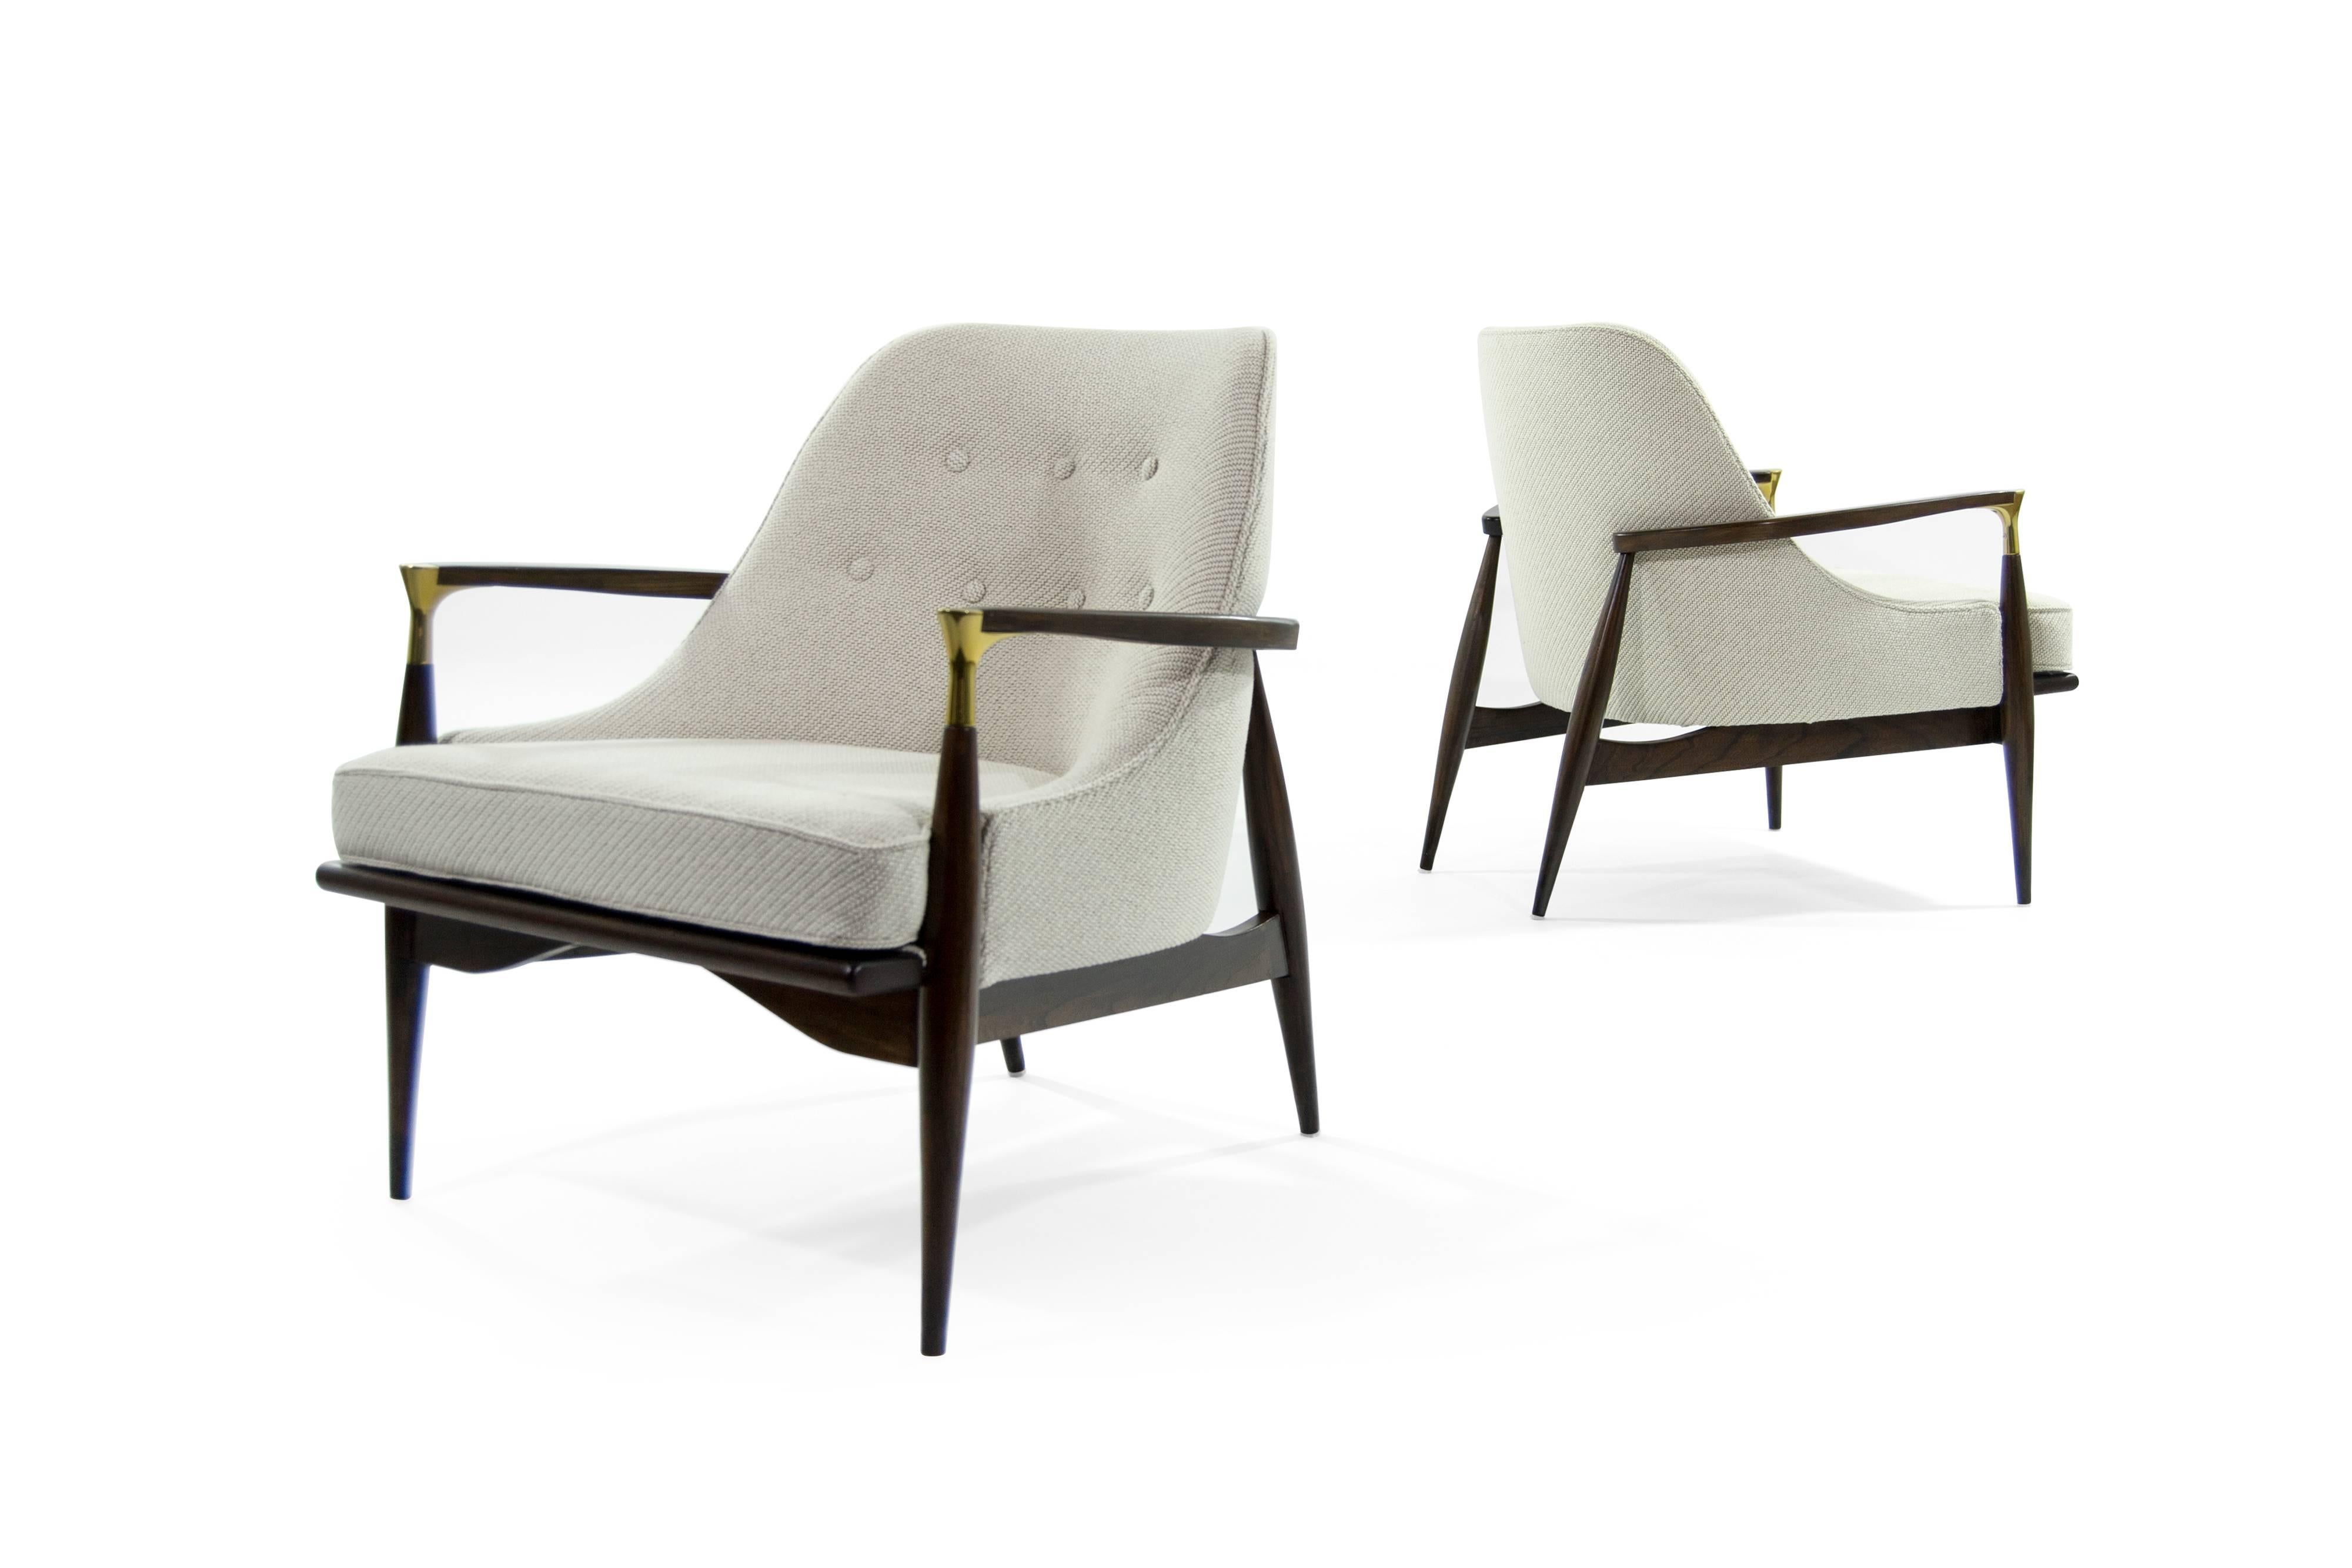 A rare pair of lounge chairs in the style of Ib Kofod-Larsen. Featuring brass details on arms. Newly upholstered in soft off-white Maharam/Kvadrat Coda soft wool. Sculptural walnut frames completely restored.